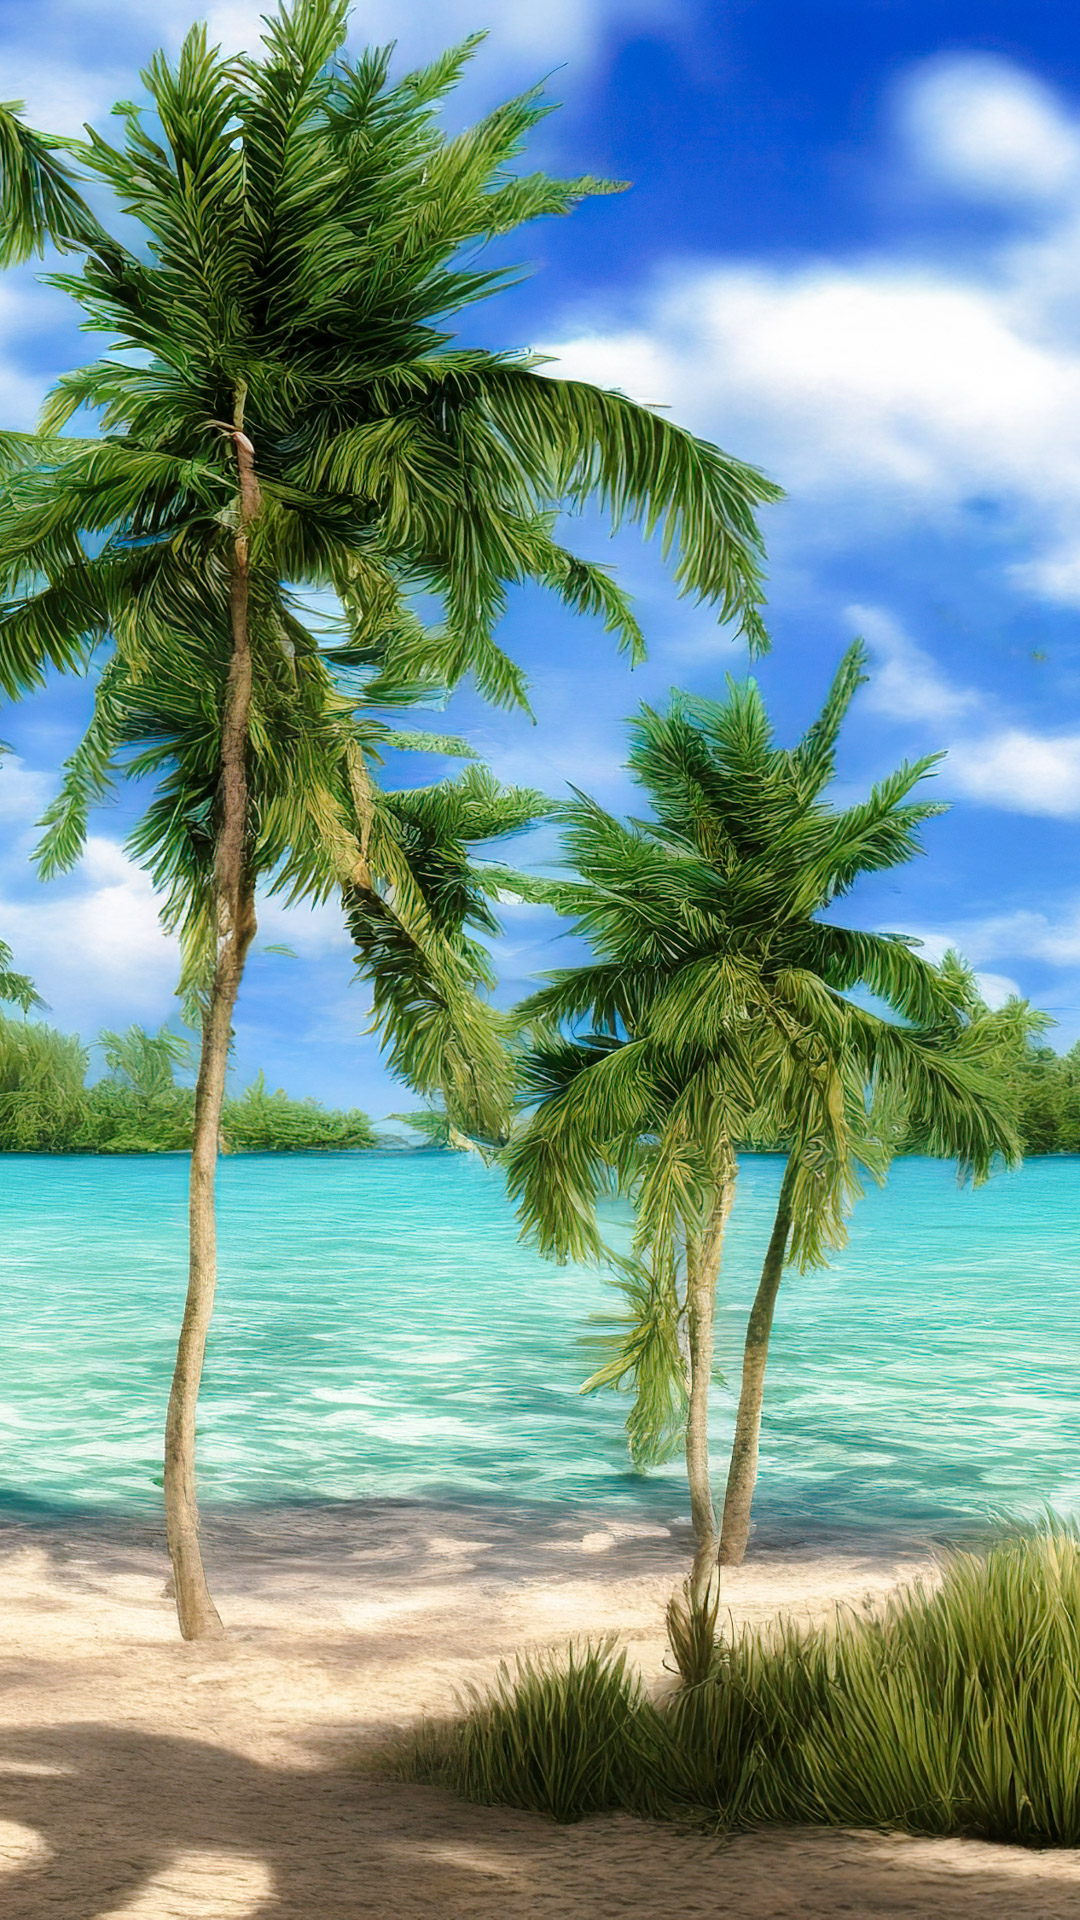 Experience the tranquility of cool nature backgrounds, featuring a tranquil beach with crystal-clear turquoise waters and palm trees swaying in the breeze.